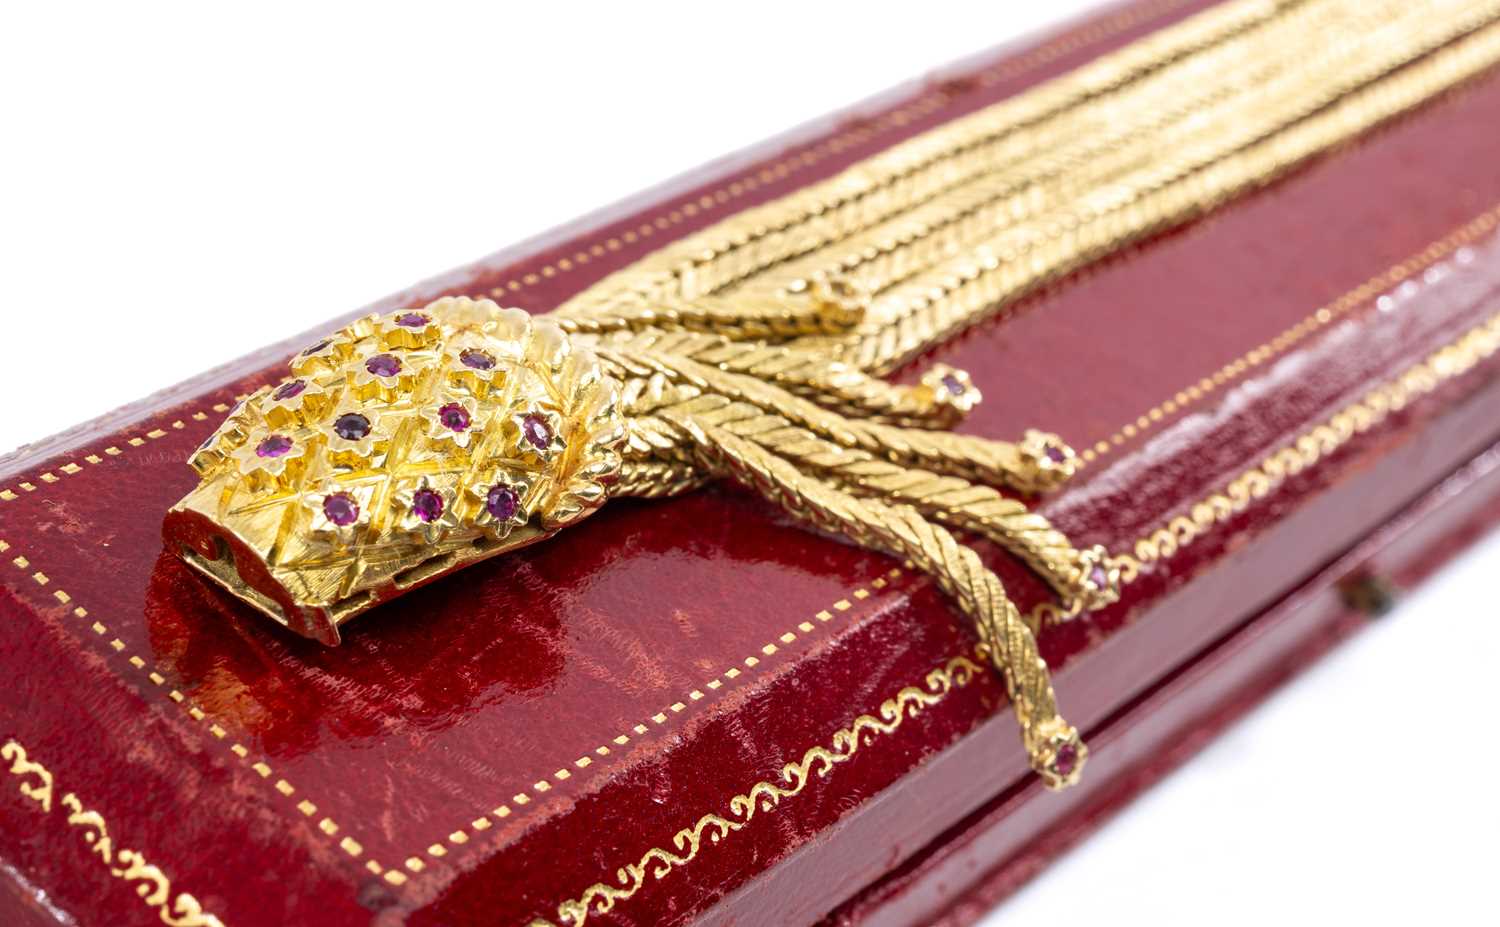 18CT GOLD SIX STRAND BRACELET, designed with pineapple terminal set with rubies, 19.5cms long, 66. - Image 3 of 3